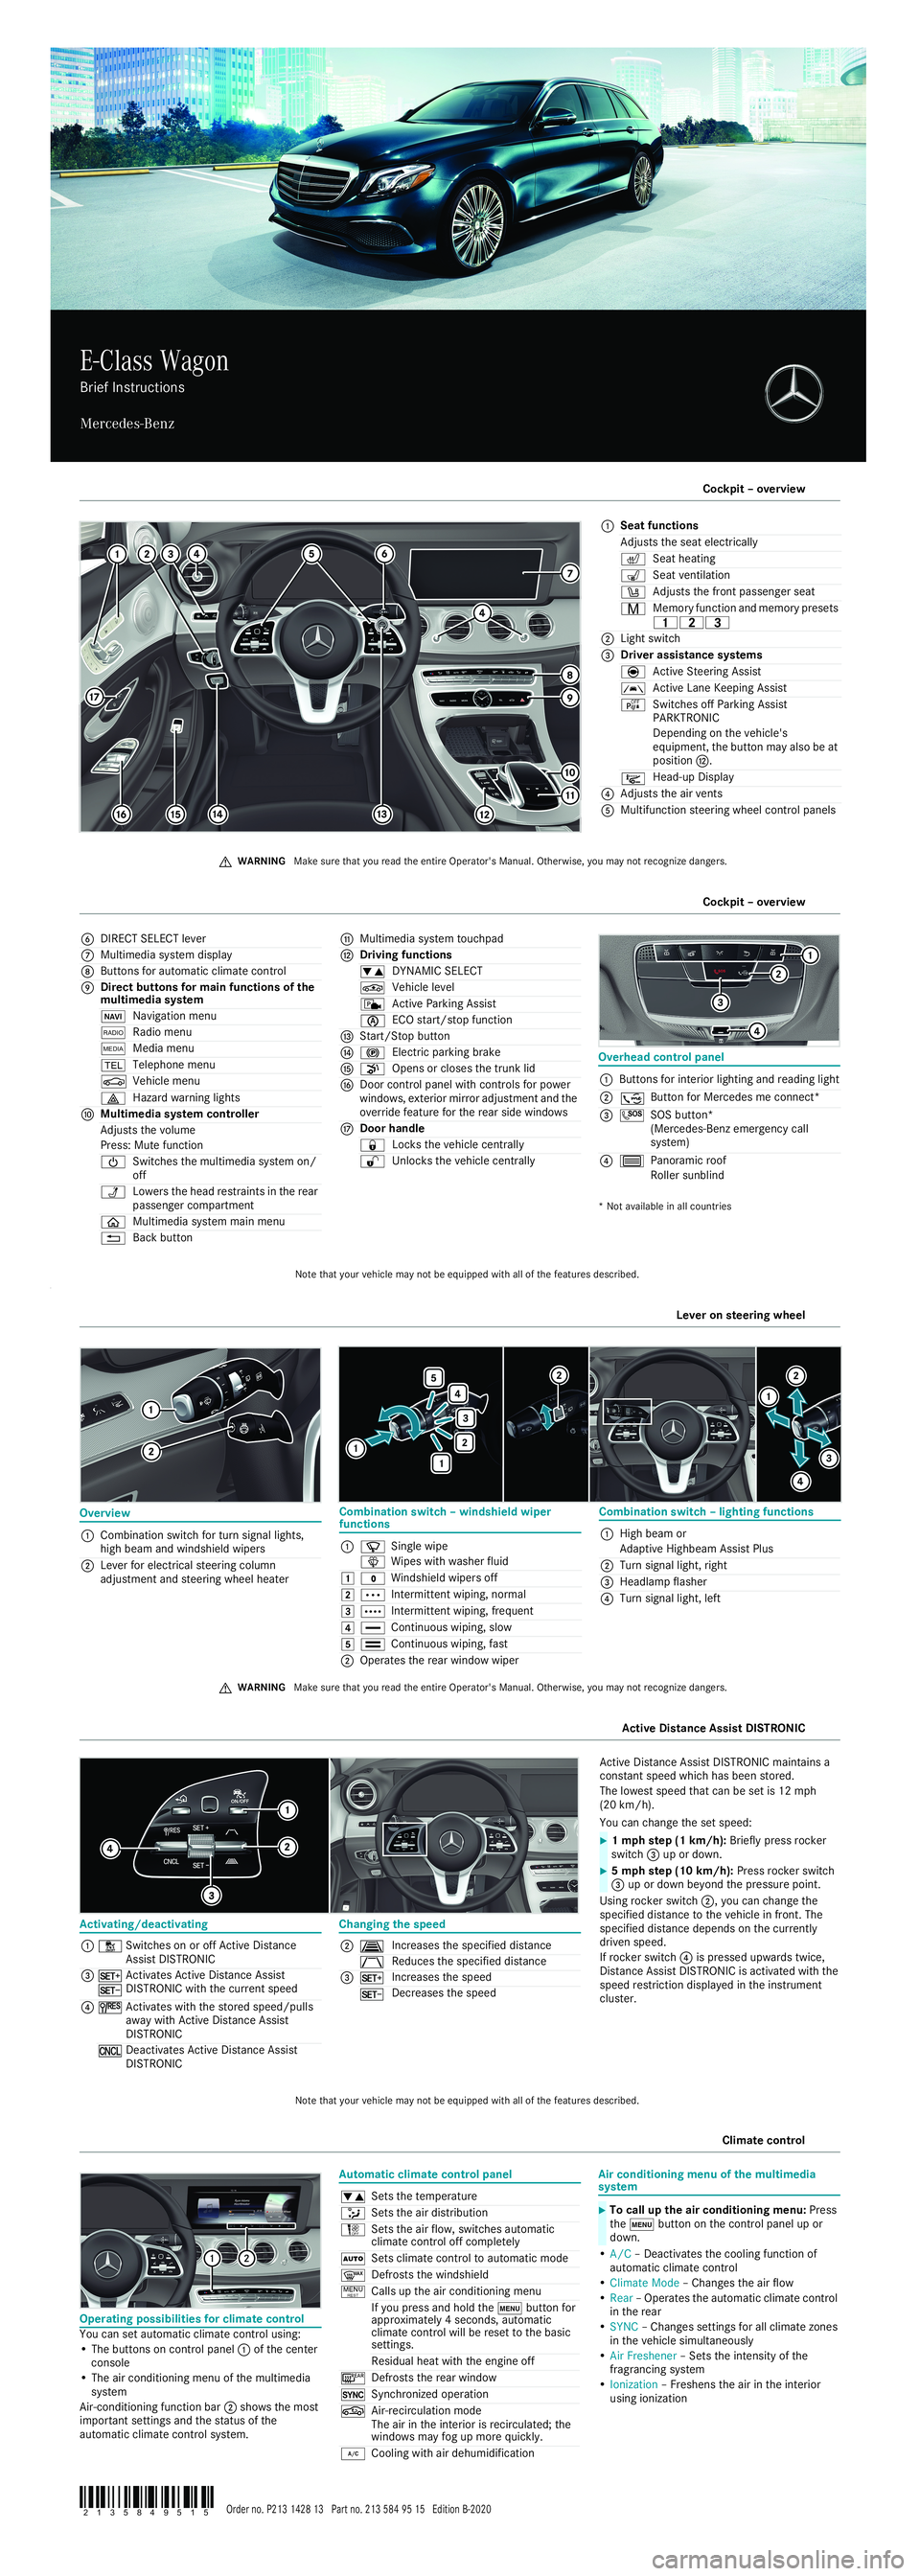 MERCEDES-BENZ E-CLASS WAGON 2020  Quick Start Guide E-Cl as sW agon
BriefI ns truc tion s
Me rced es-Ben z Ov
erview
1 Comb inat ion switch fort urns igna llig ht s,
hi gh beam andw inds hie ldwipe rs
2 Lever fore lect rica lsteer ingc olum n
ad justme